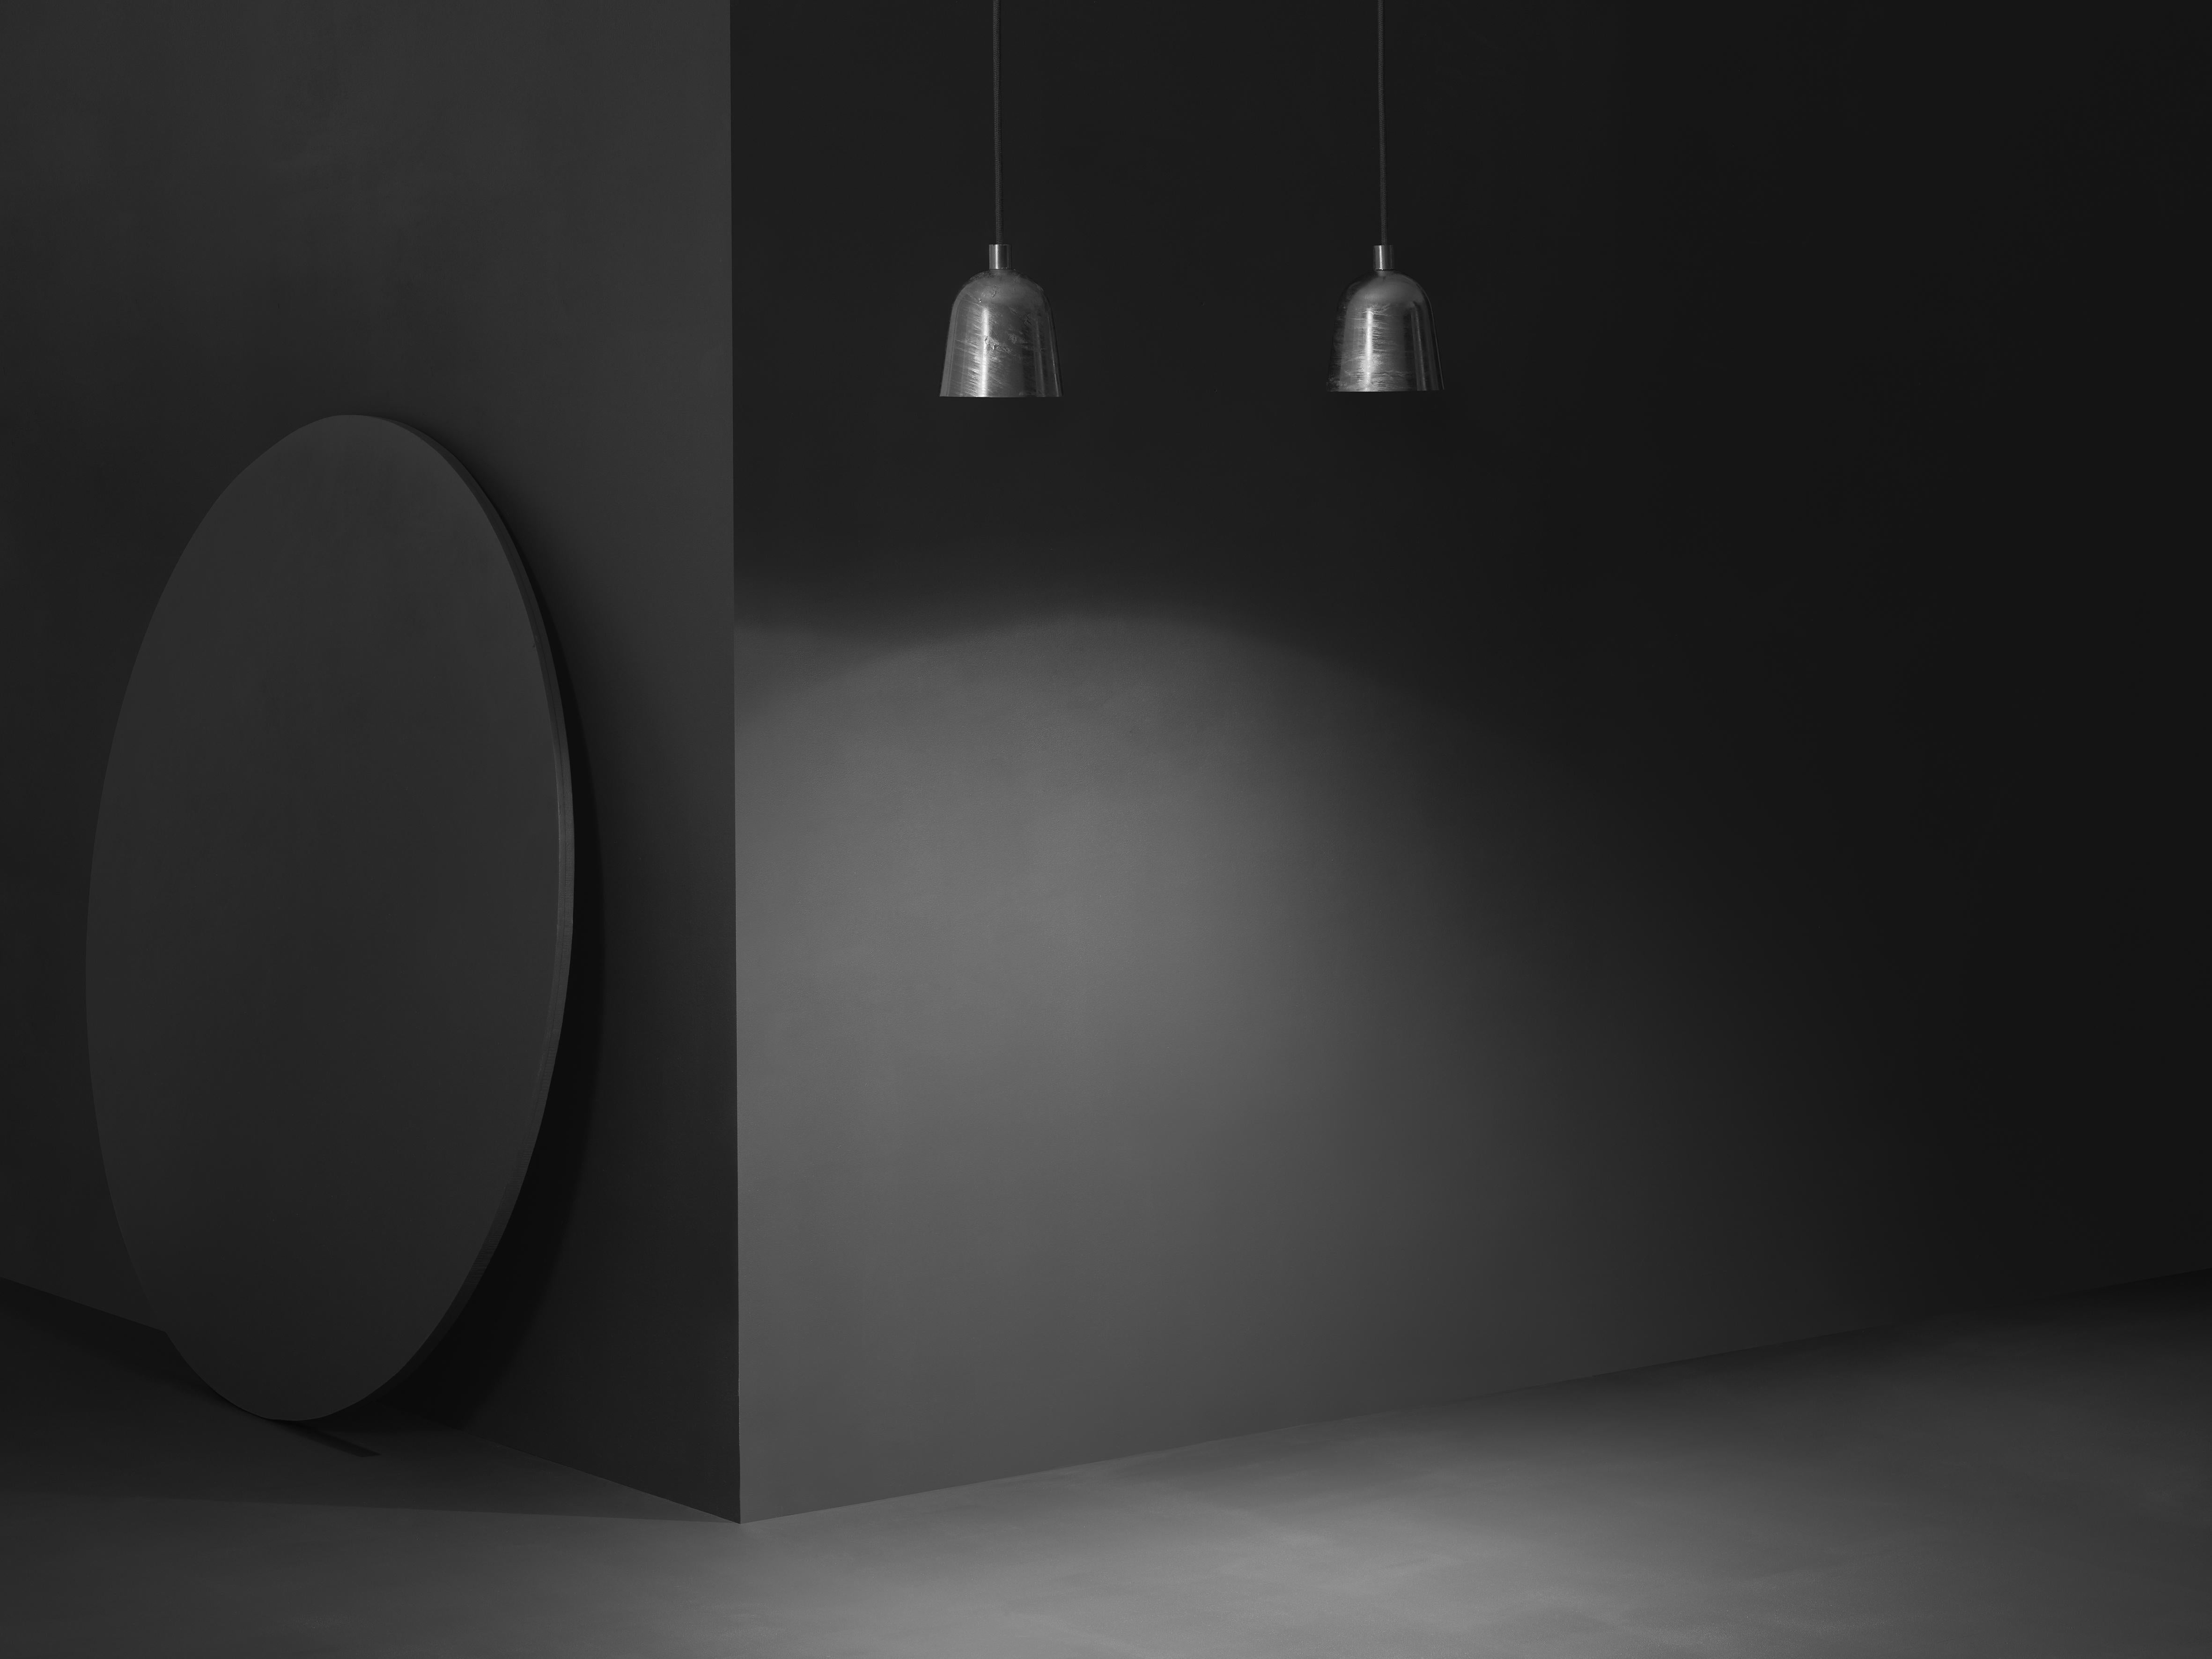 Made of painted metal, the Convex Mini pendant was designed by Jens Fager for Zero Lighting. Dropping its cone-shaped shade from a simple cord, the Convex is modern architecture’s answer to make it clean but make it interesting. We offer the Convex